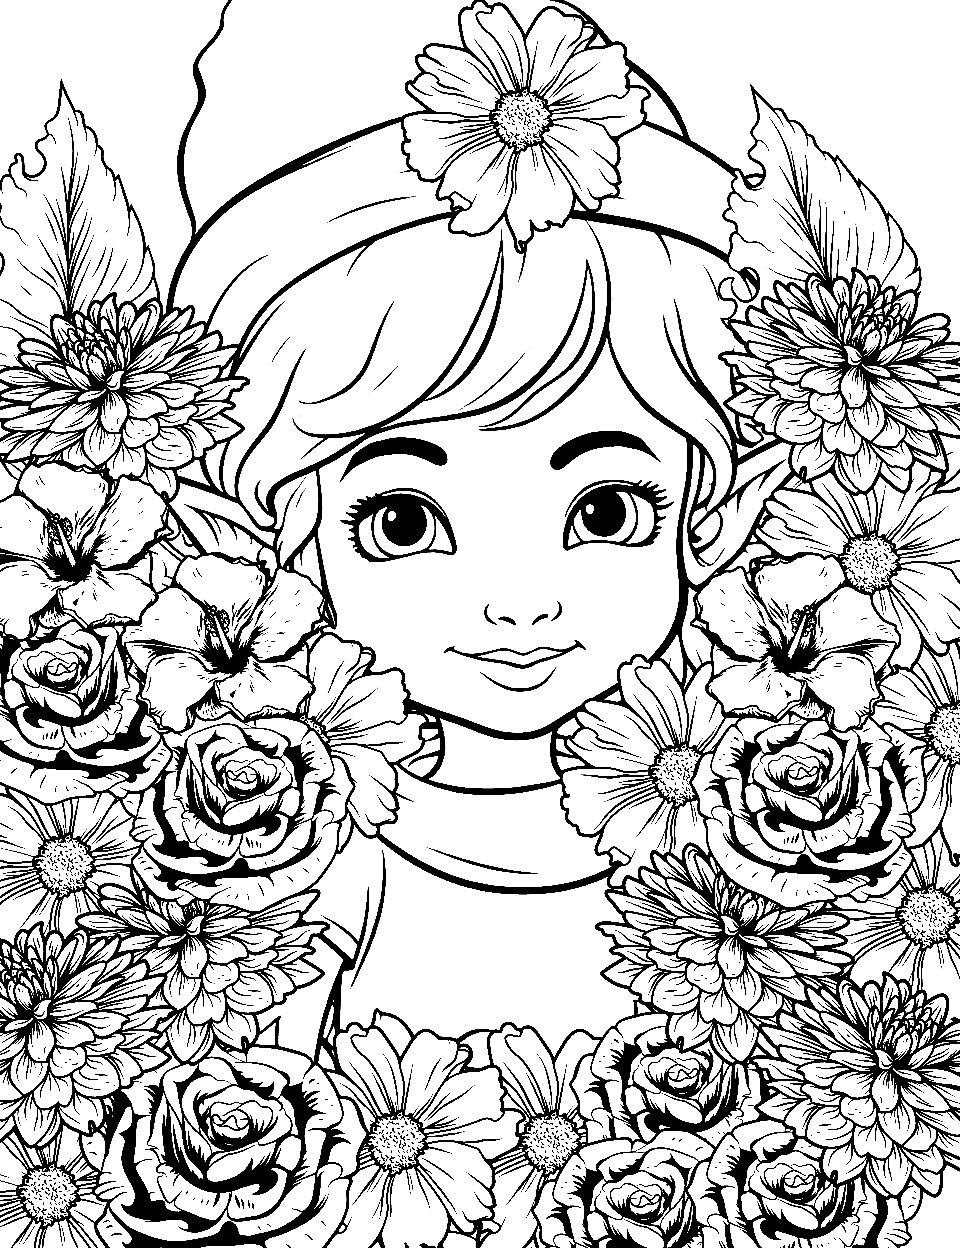 Spring Elf Coloring Page - An elf enjoying the beauty of blooming spring flowers.